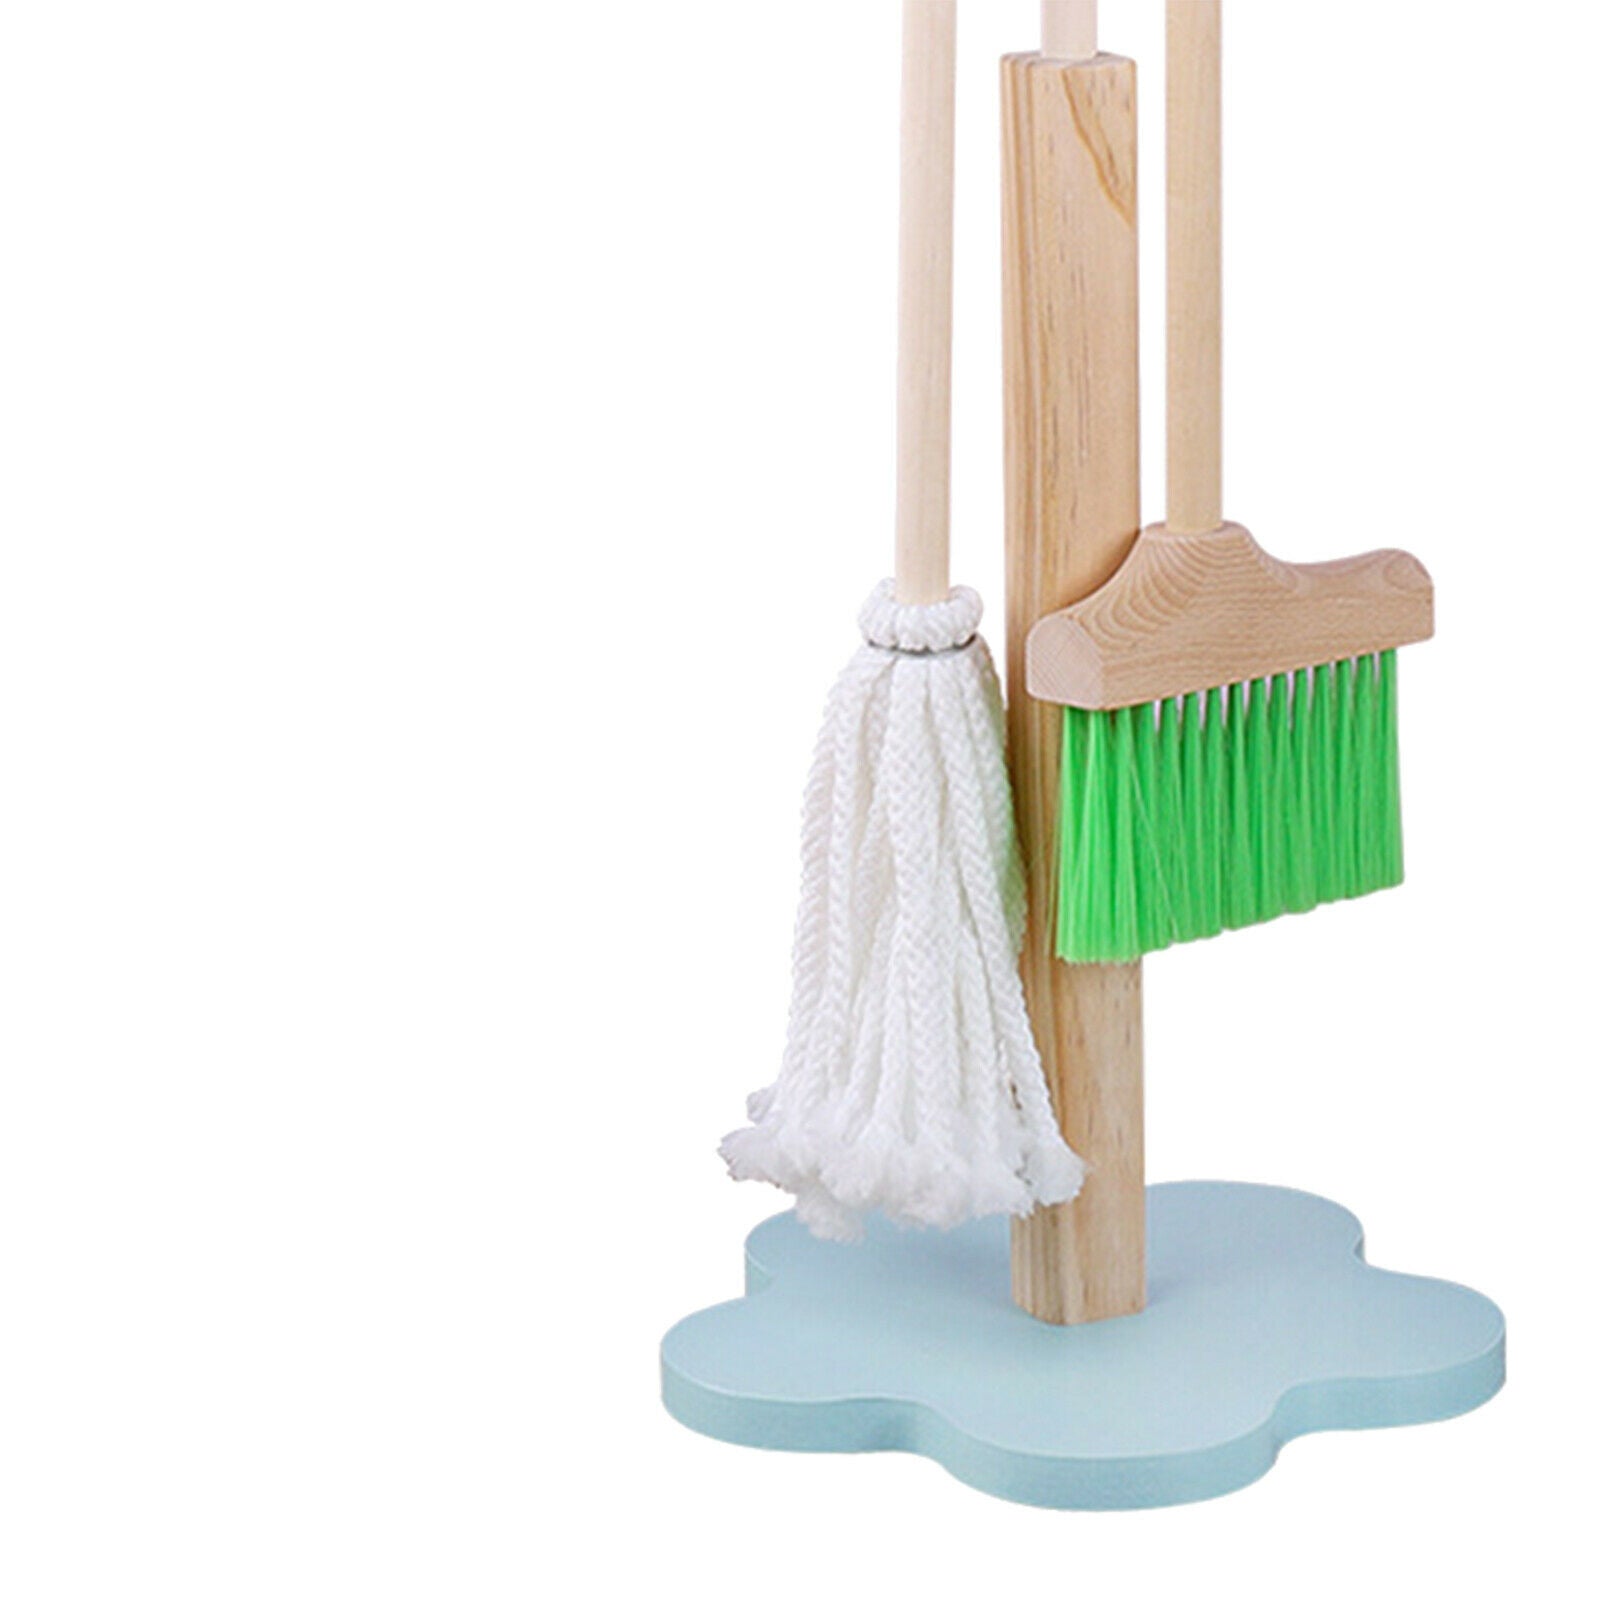 Children Cleaning Tools Set Mop Combination for Kids Girls Boys Housekeeping